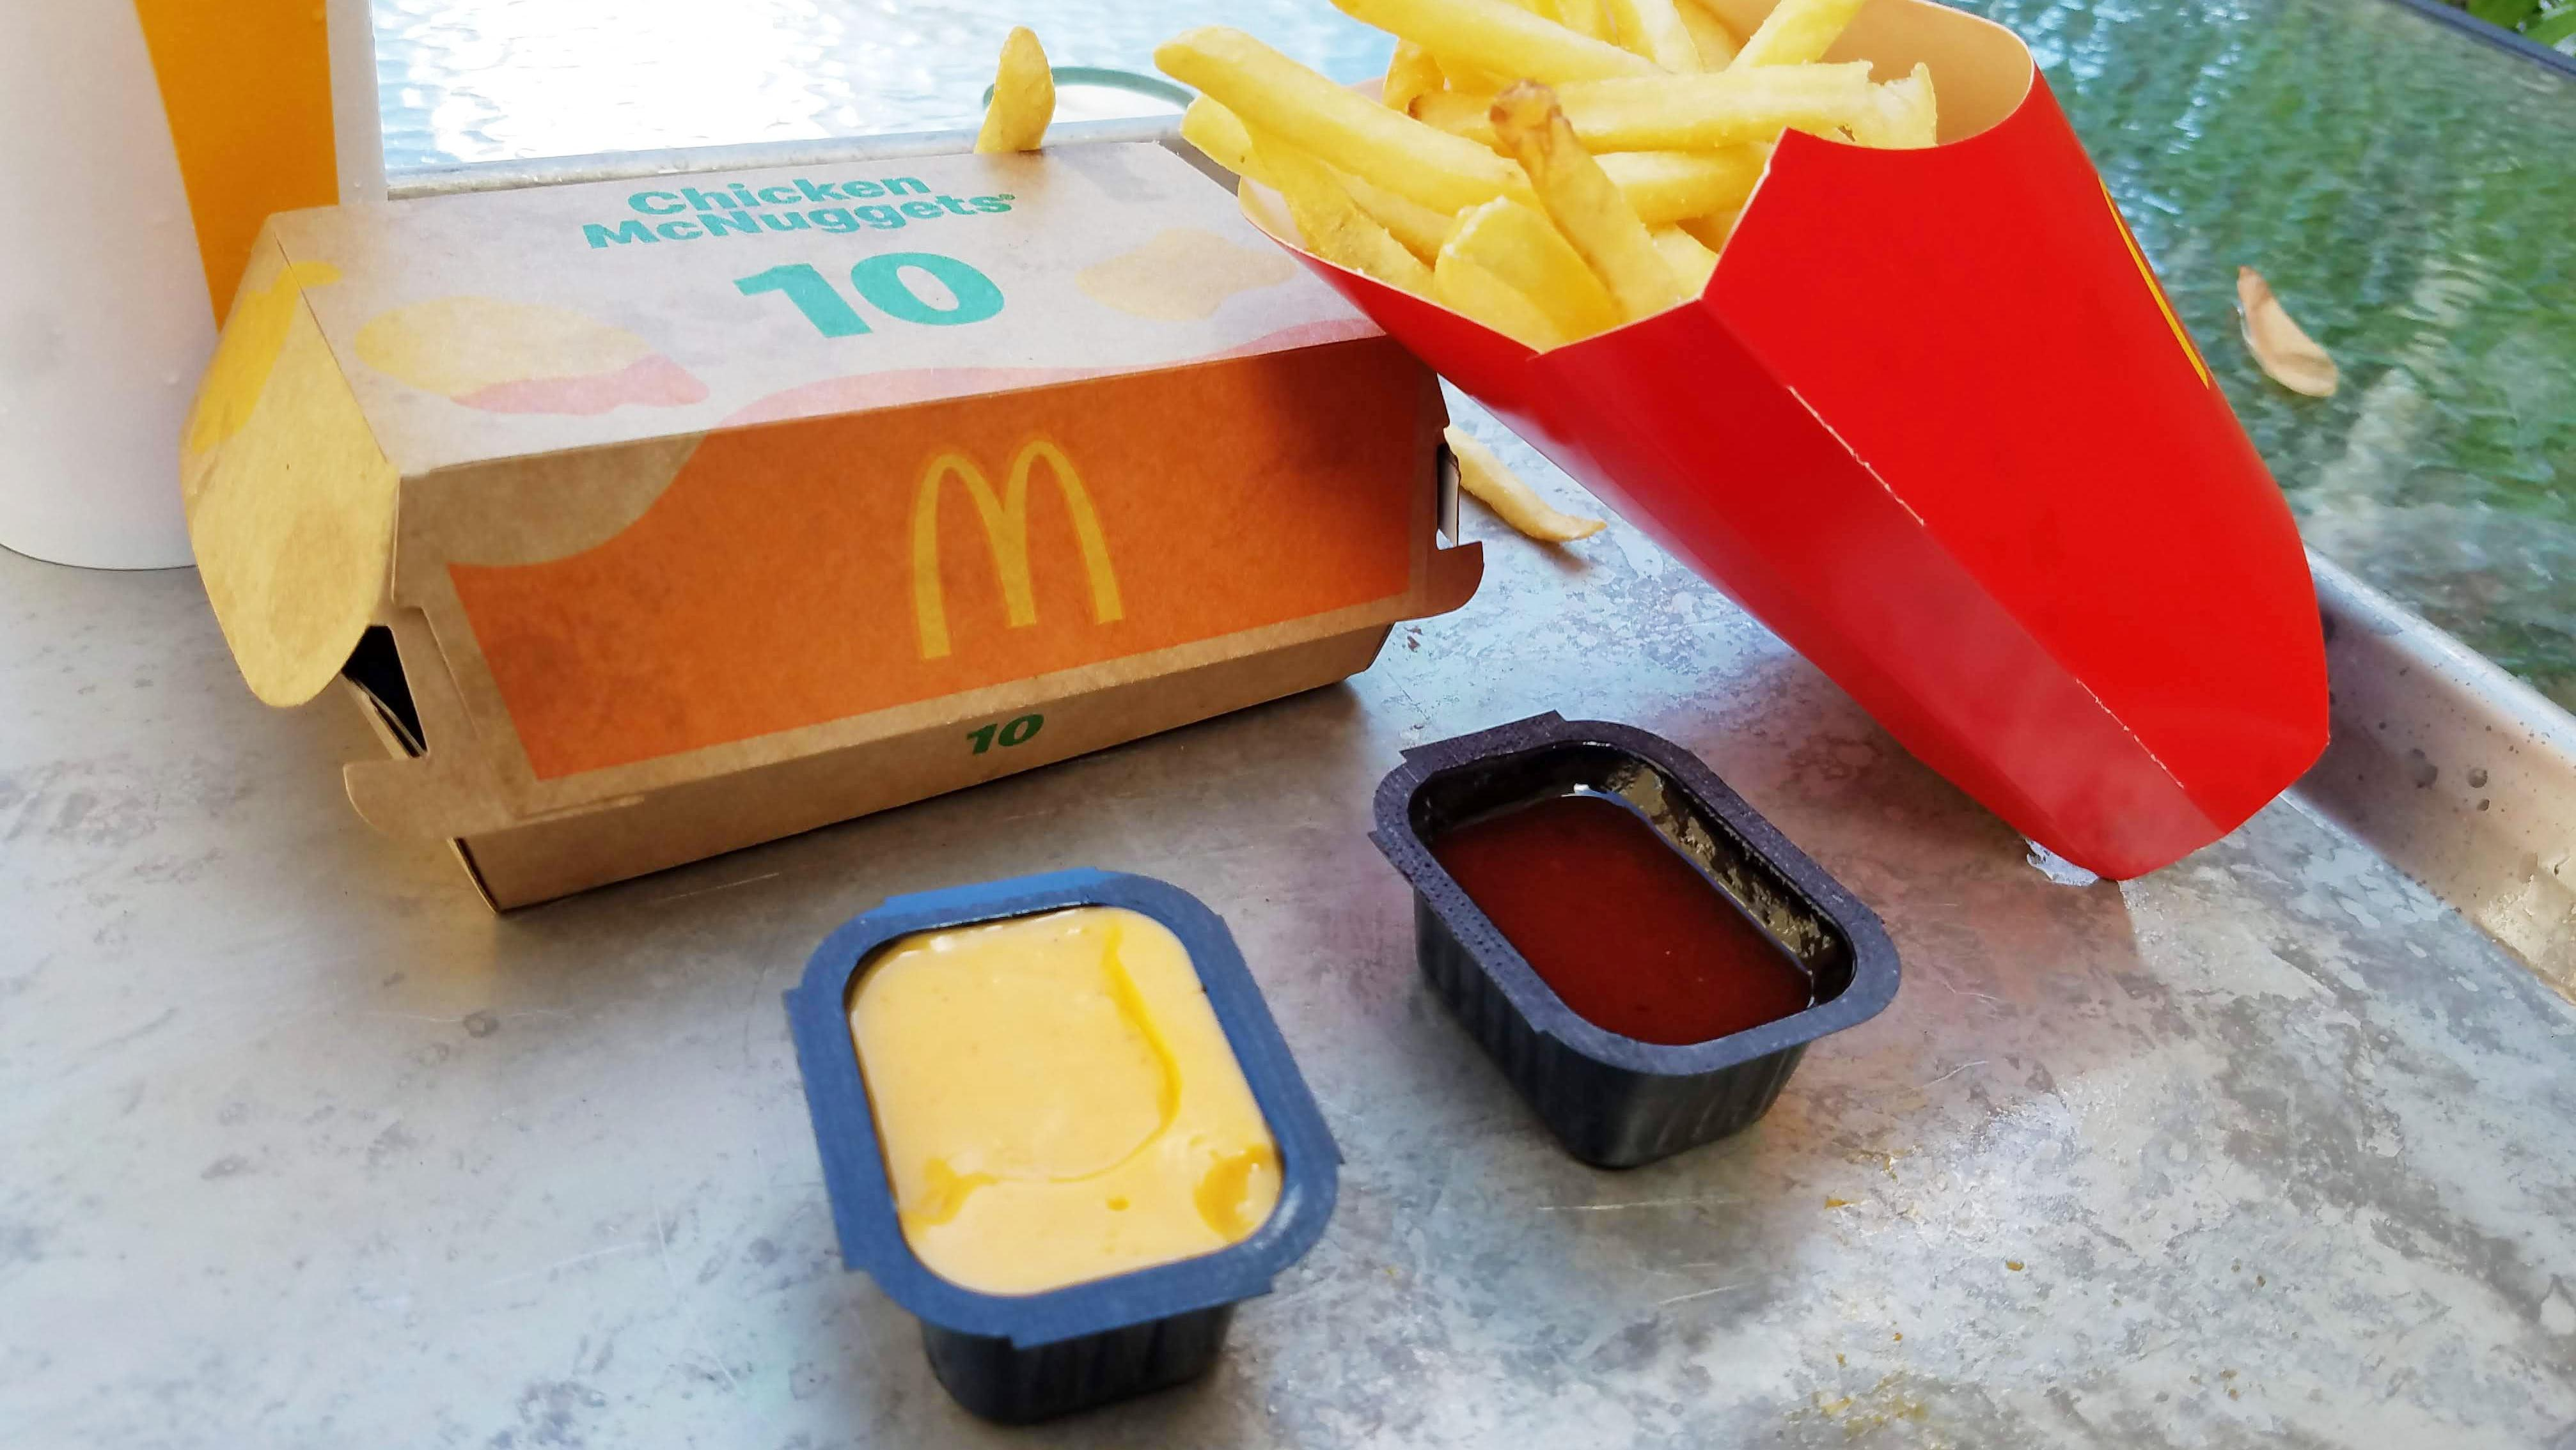 10-piece McNugget meal with two dipping sauces and fries